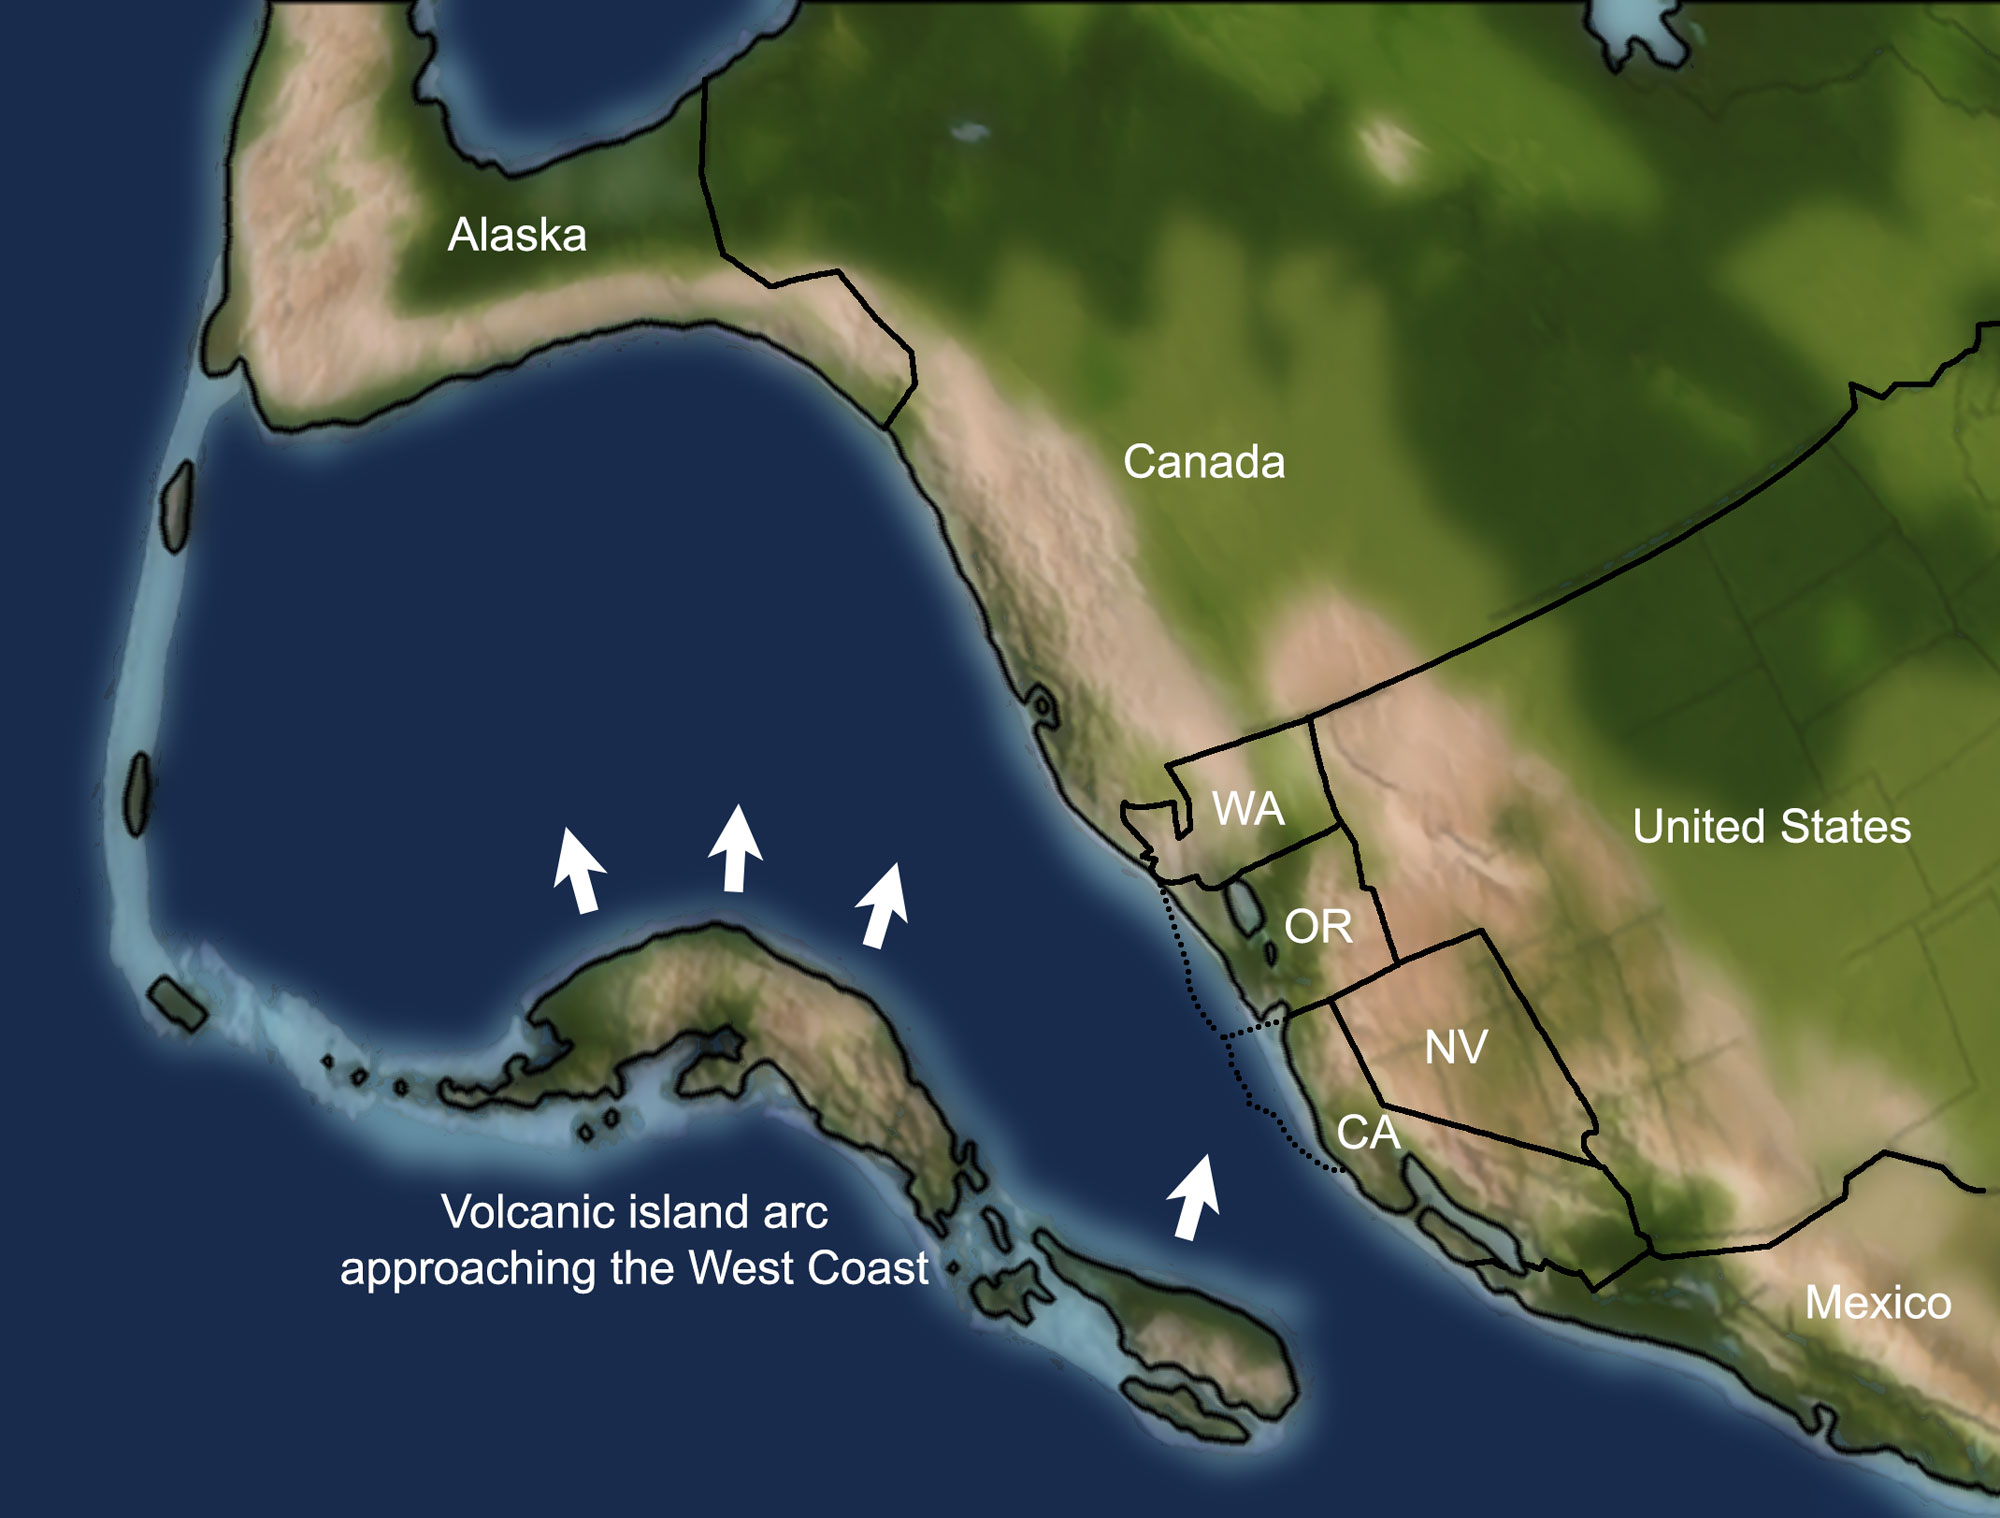 Map of the West Coast of North America in the Early Cretaceous, about 135 million years ago. The continent is tilted so that the west coast trends from the northwest to the southeast. Parts of Alaska have accreted to the continent. Portions of western Oregon and northern California have not yet accreted. A volcanic island arc is present in the Pacific and arrows indicate its movement toward the northwestern coast of North America.